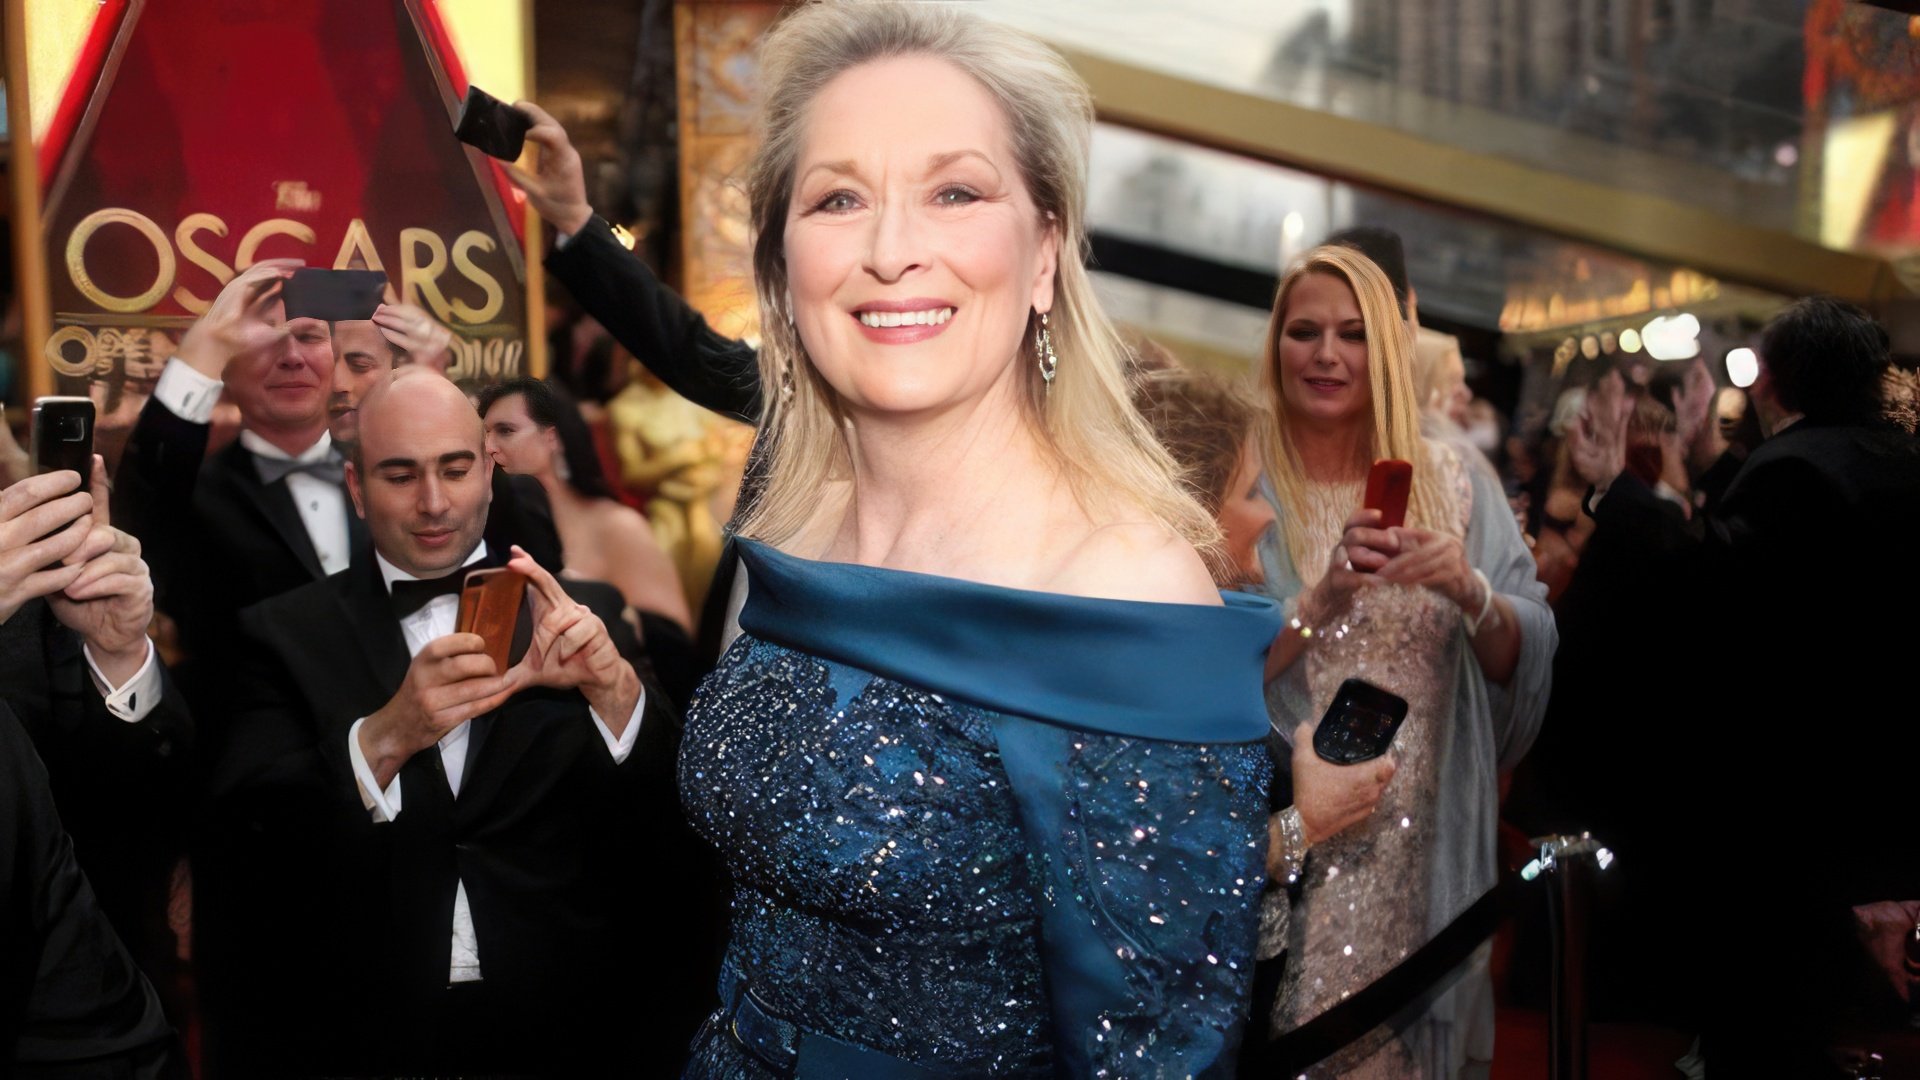 Meryl Streep was nominated for Oscar 21 times